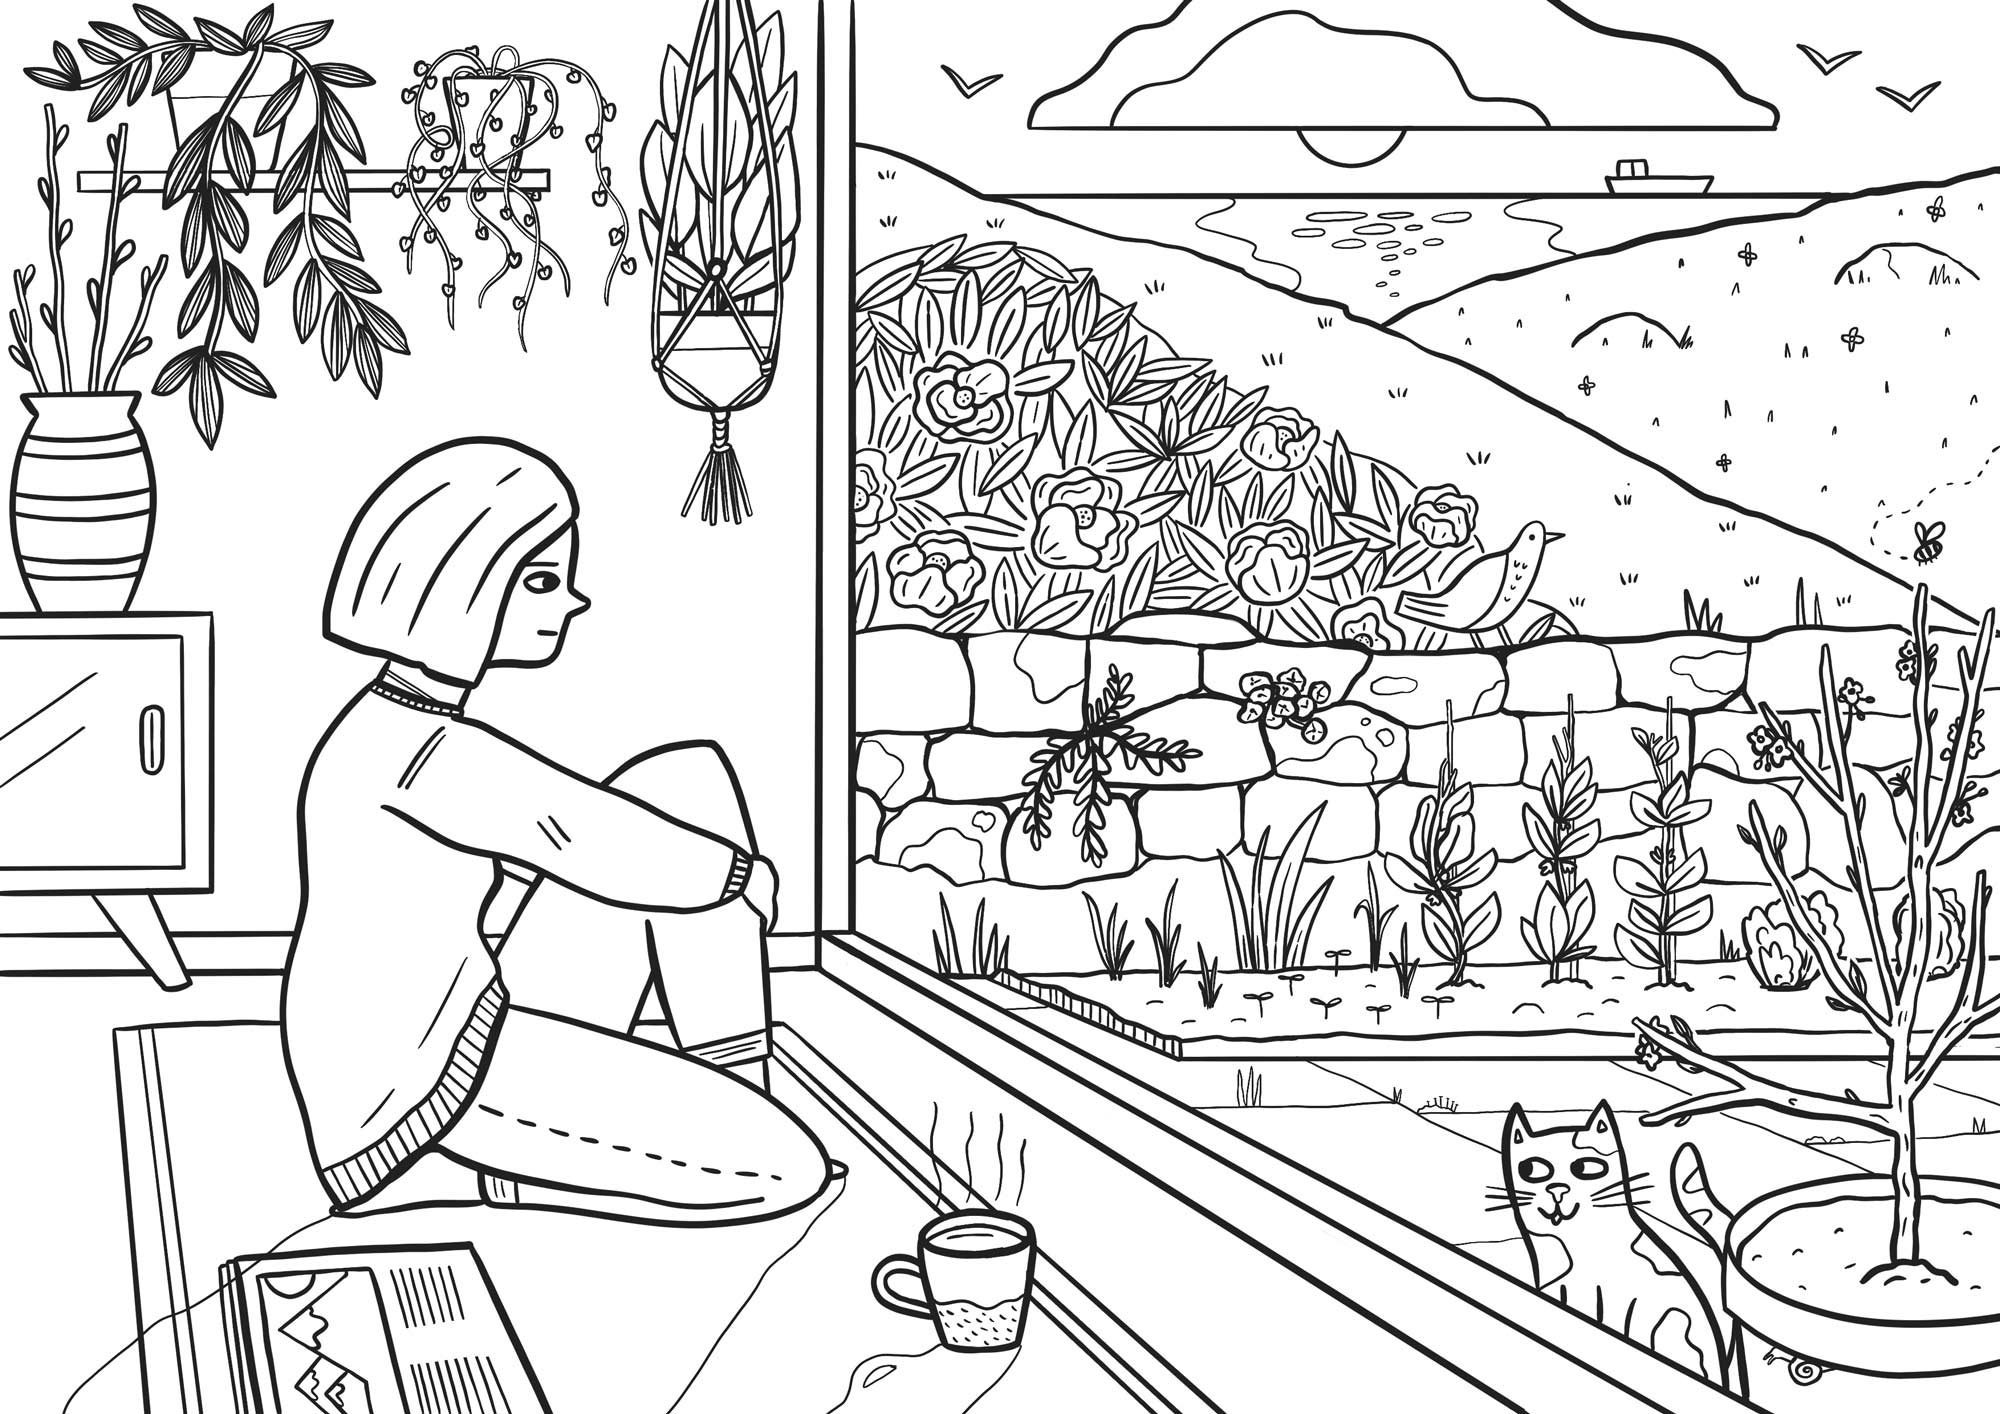 Colouring Book Page for Millican by Elly Jahnz